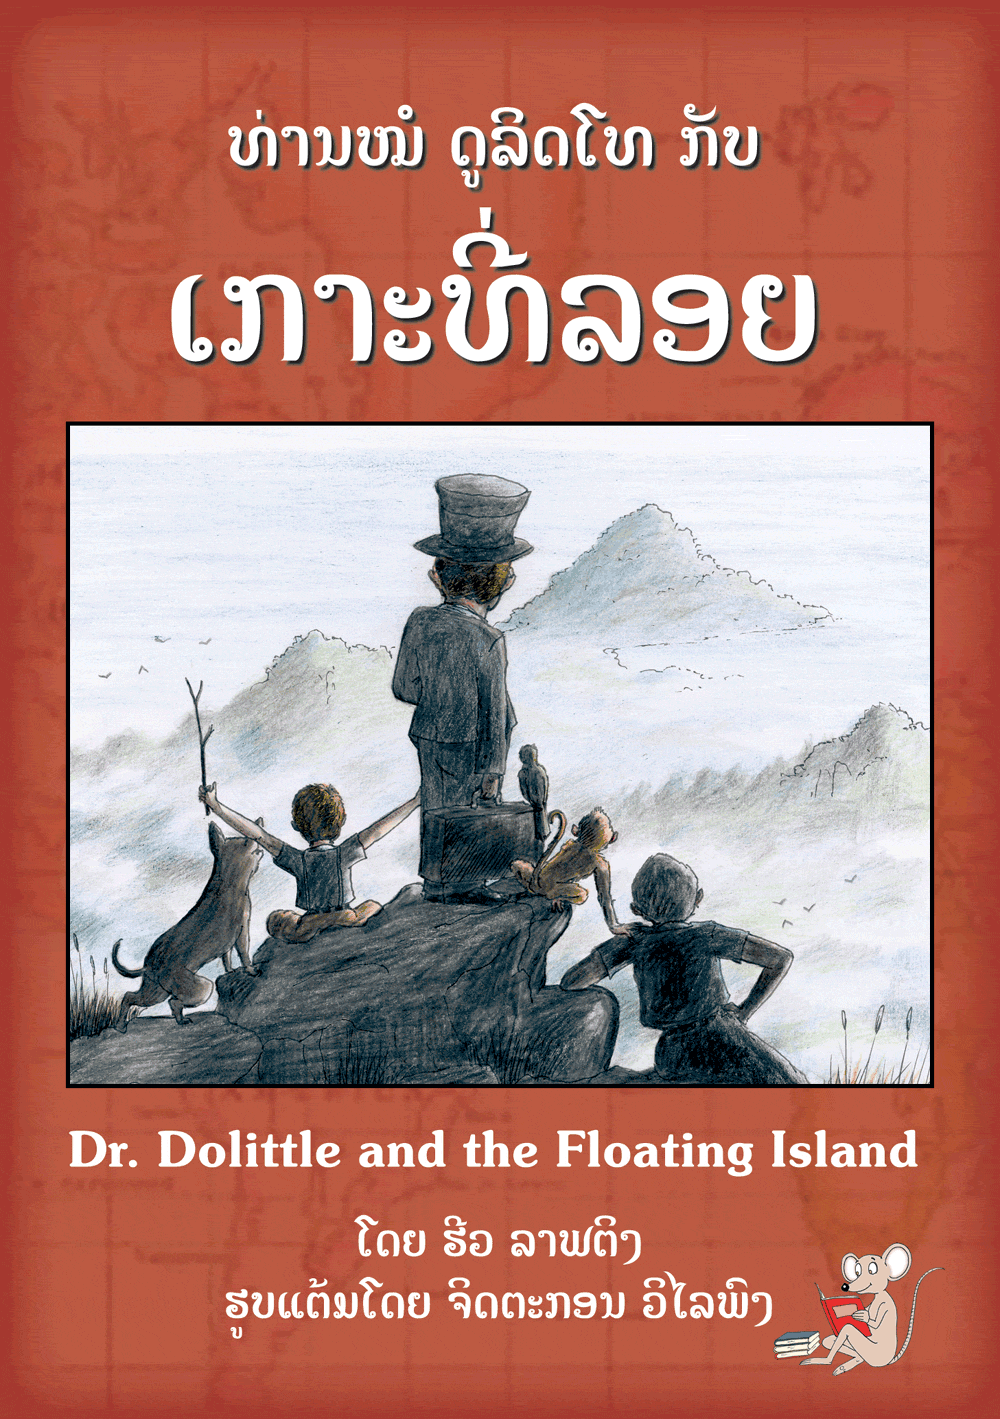 Dr. Dolittle and the Floating Island large book cover, published in Lao and English